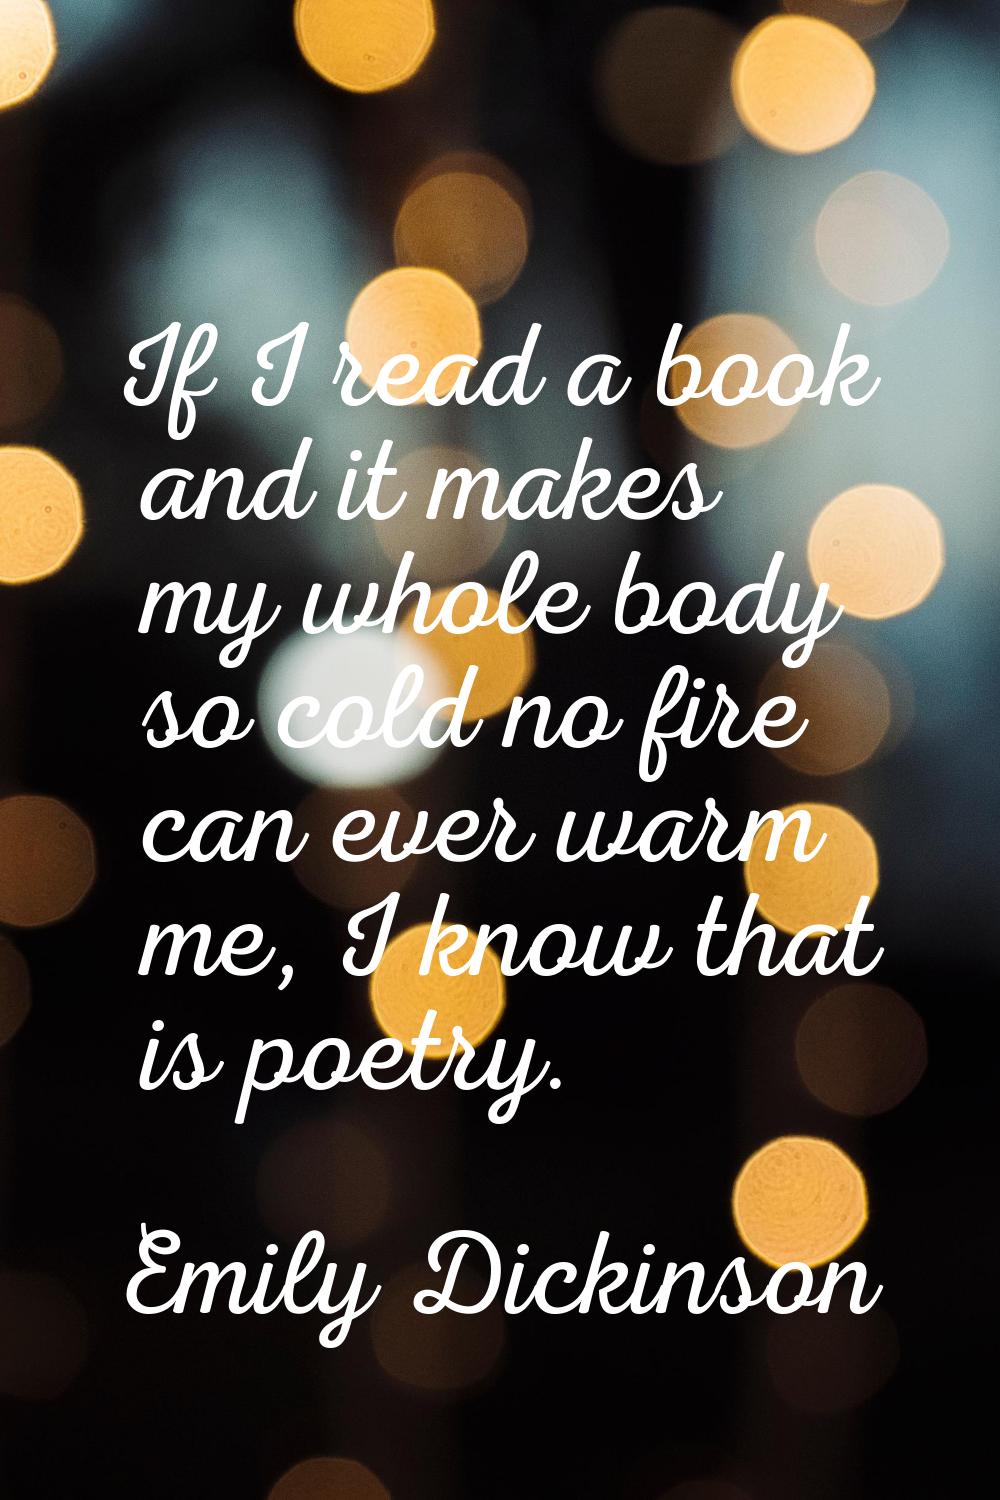 If I read a book and it makes my whole body so cold no fire can ever warm me, I know that is poetry